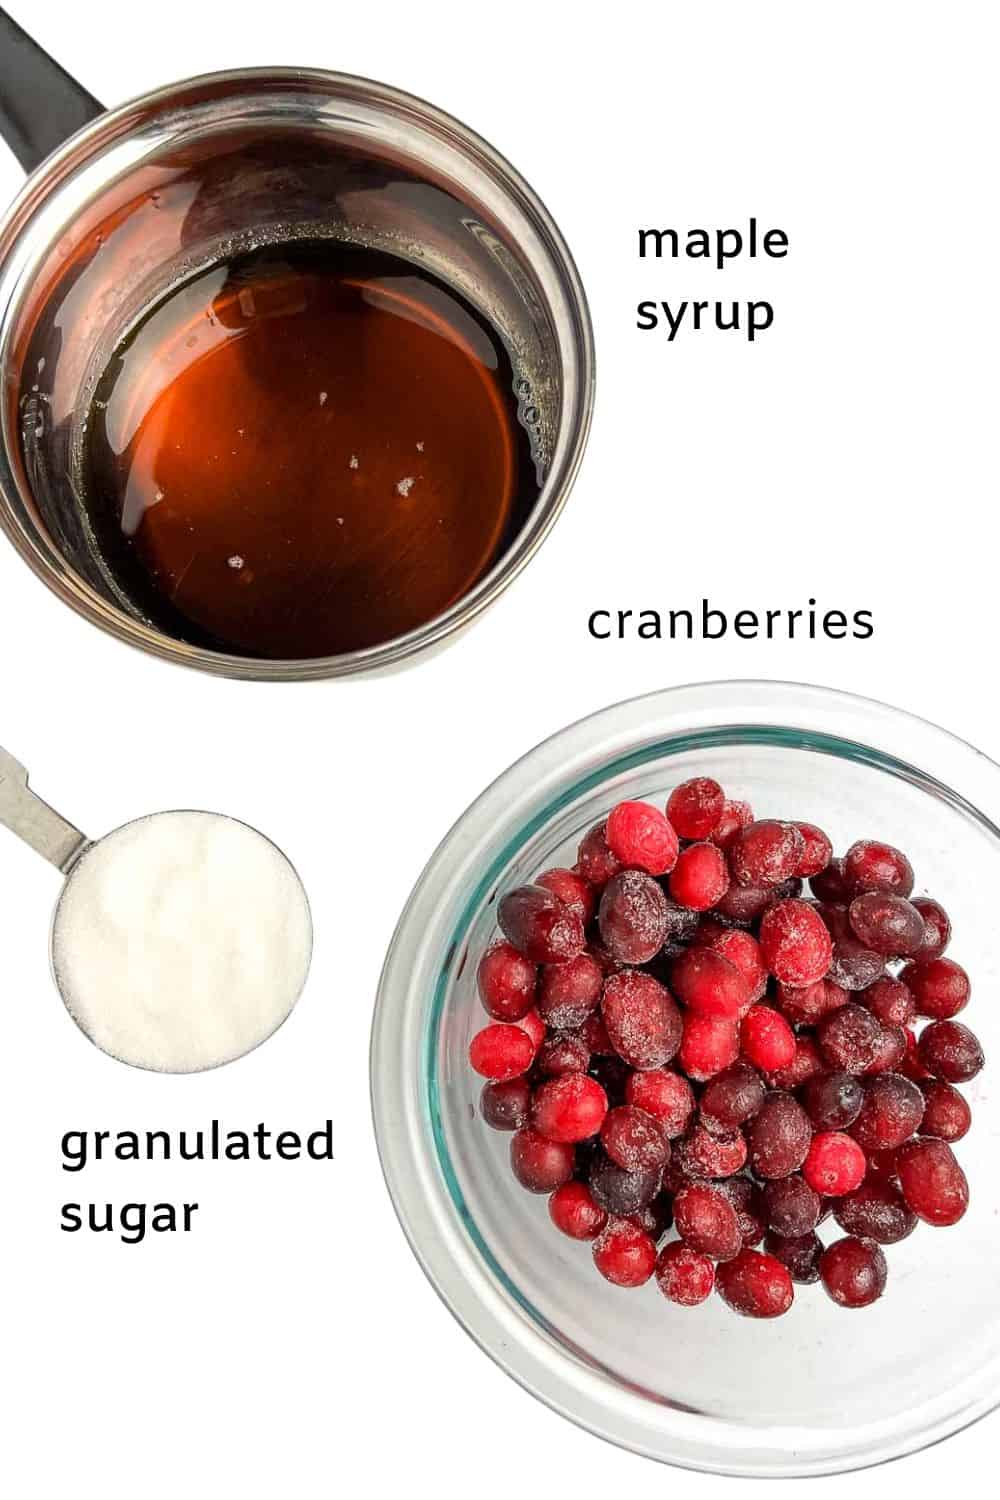 Ingredients for sugared cranberries, maple syrup, cranberries and granulated sugar.